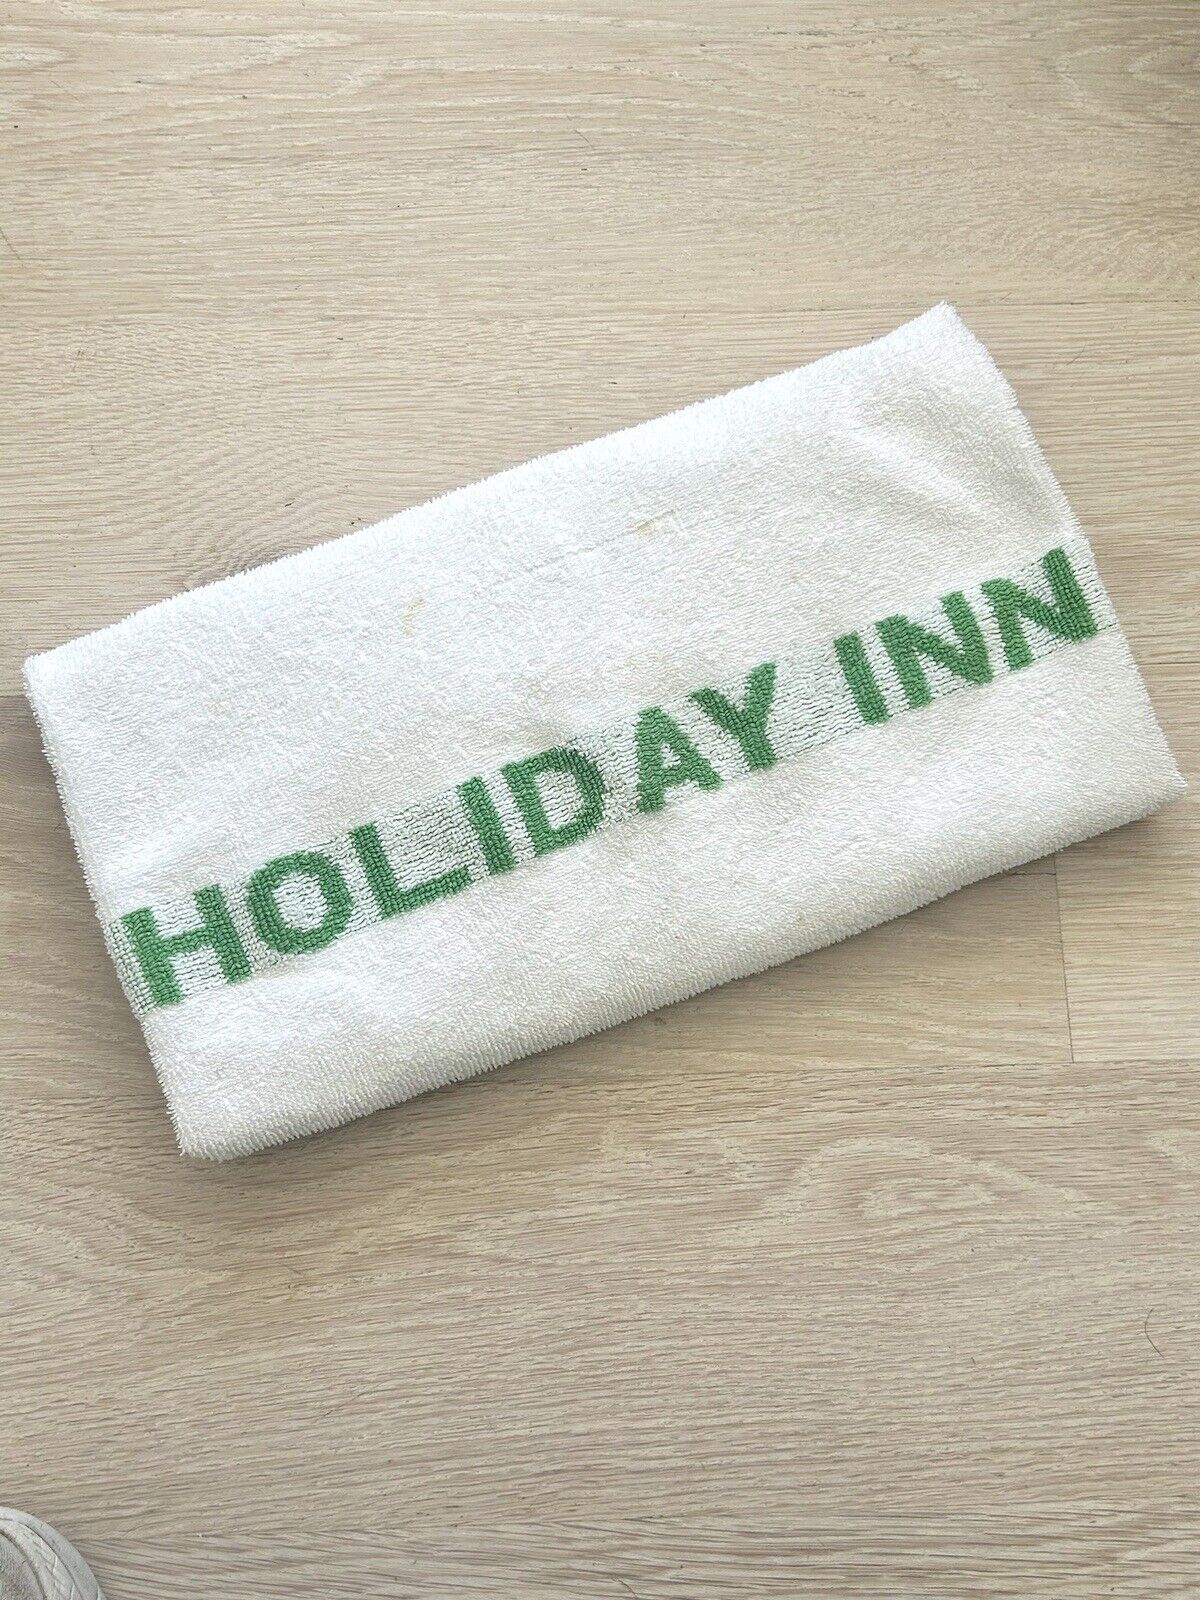 Vintage HOLIDAY INN Motel Bath Towel Cannon Cotton Green Letters